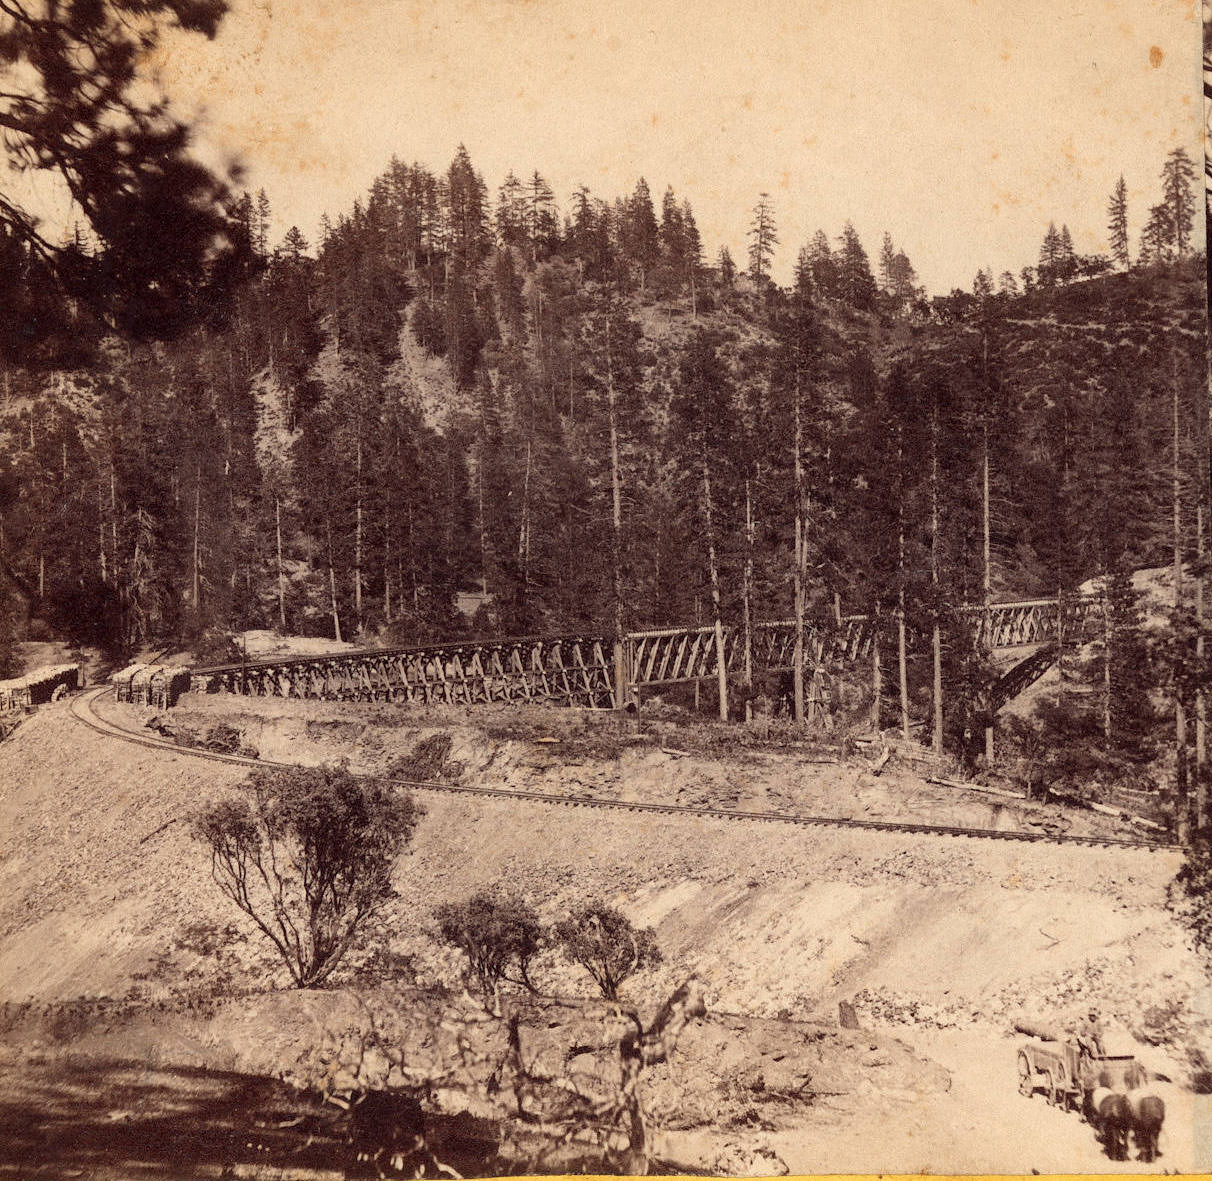 Long Ravine Bridge from the West. 56 miles from Sacramento, 1866